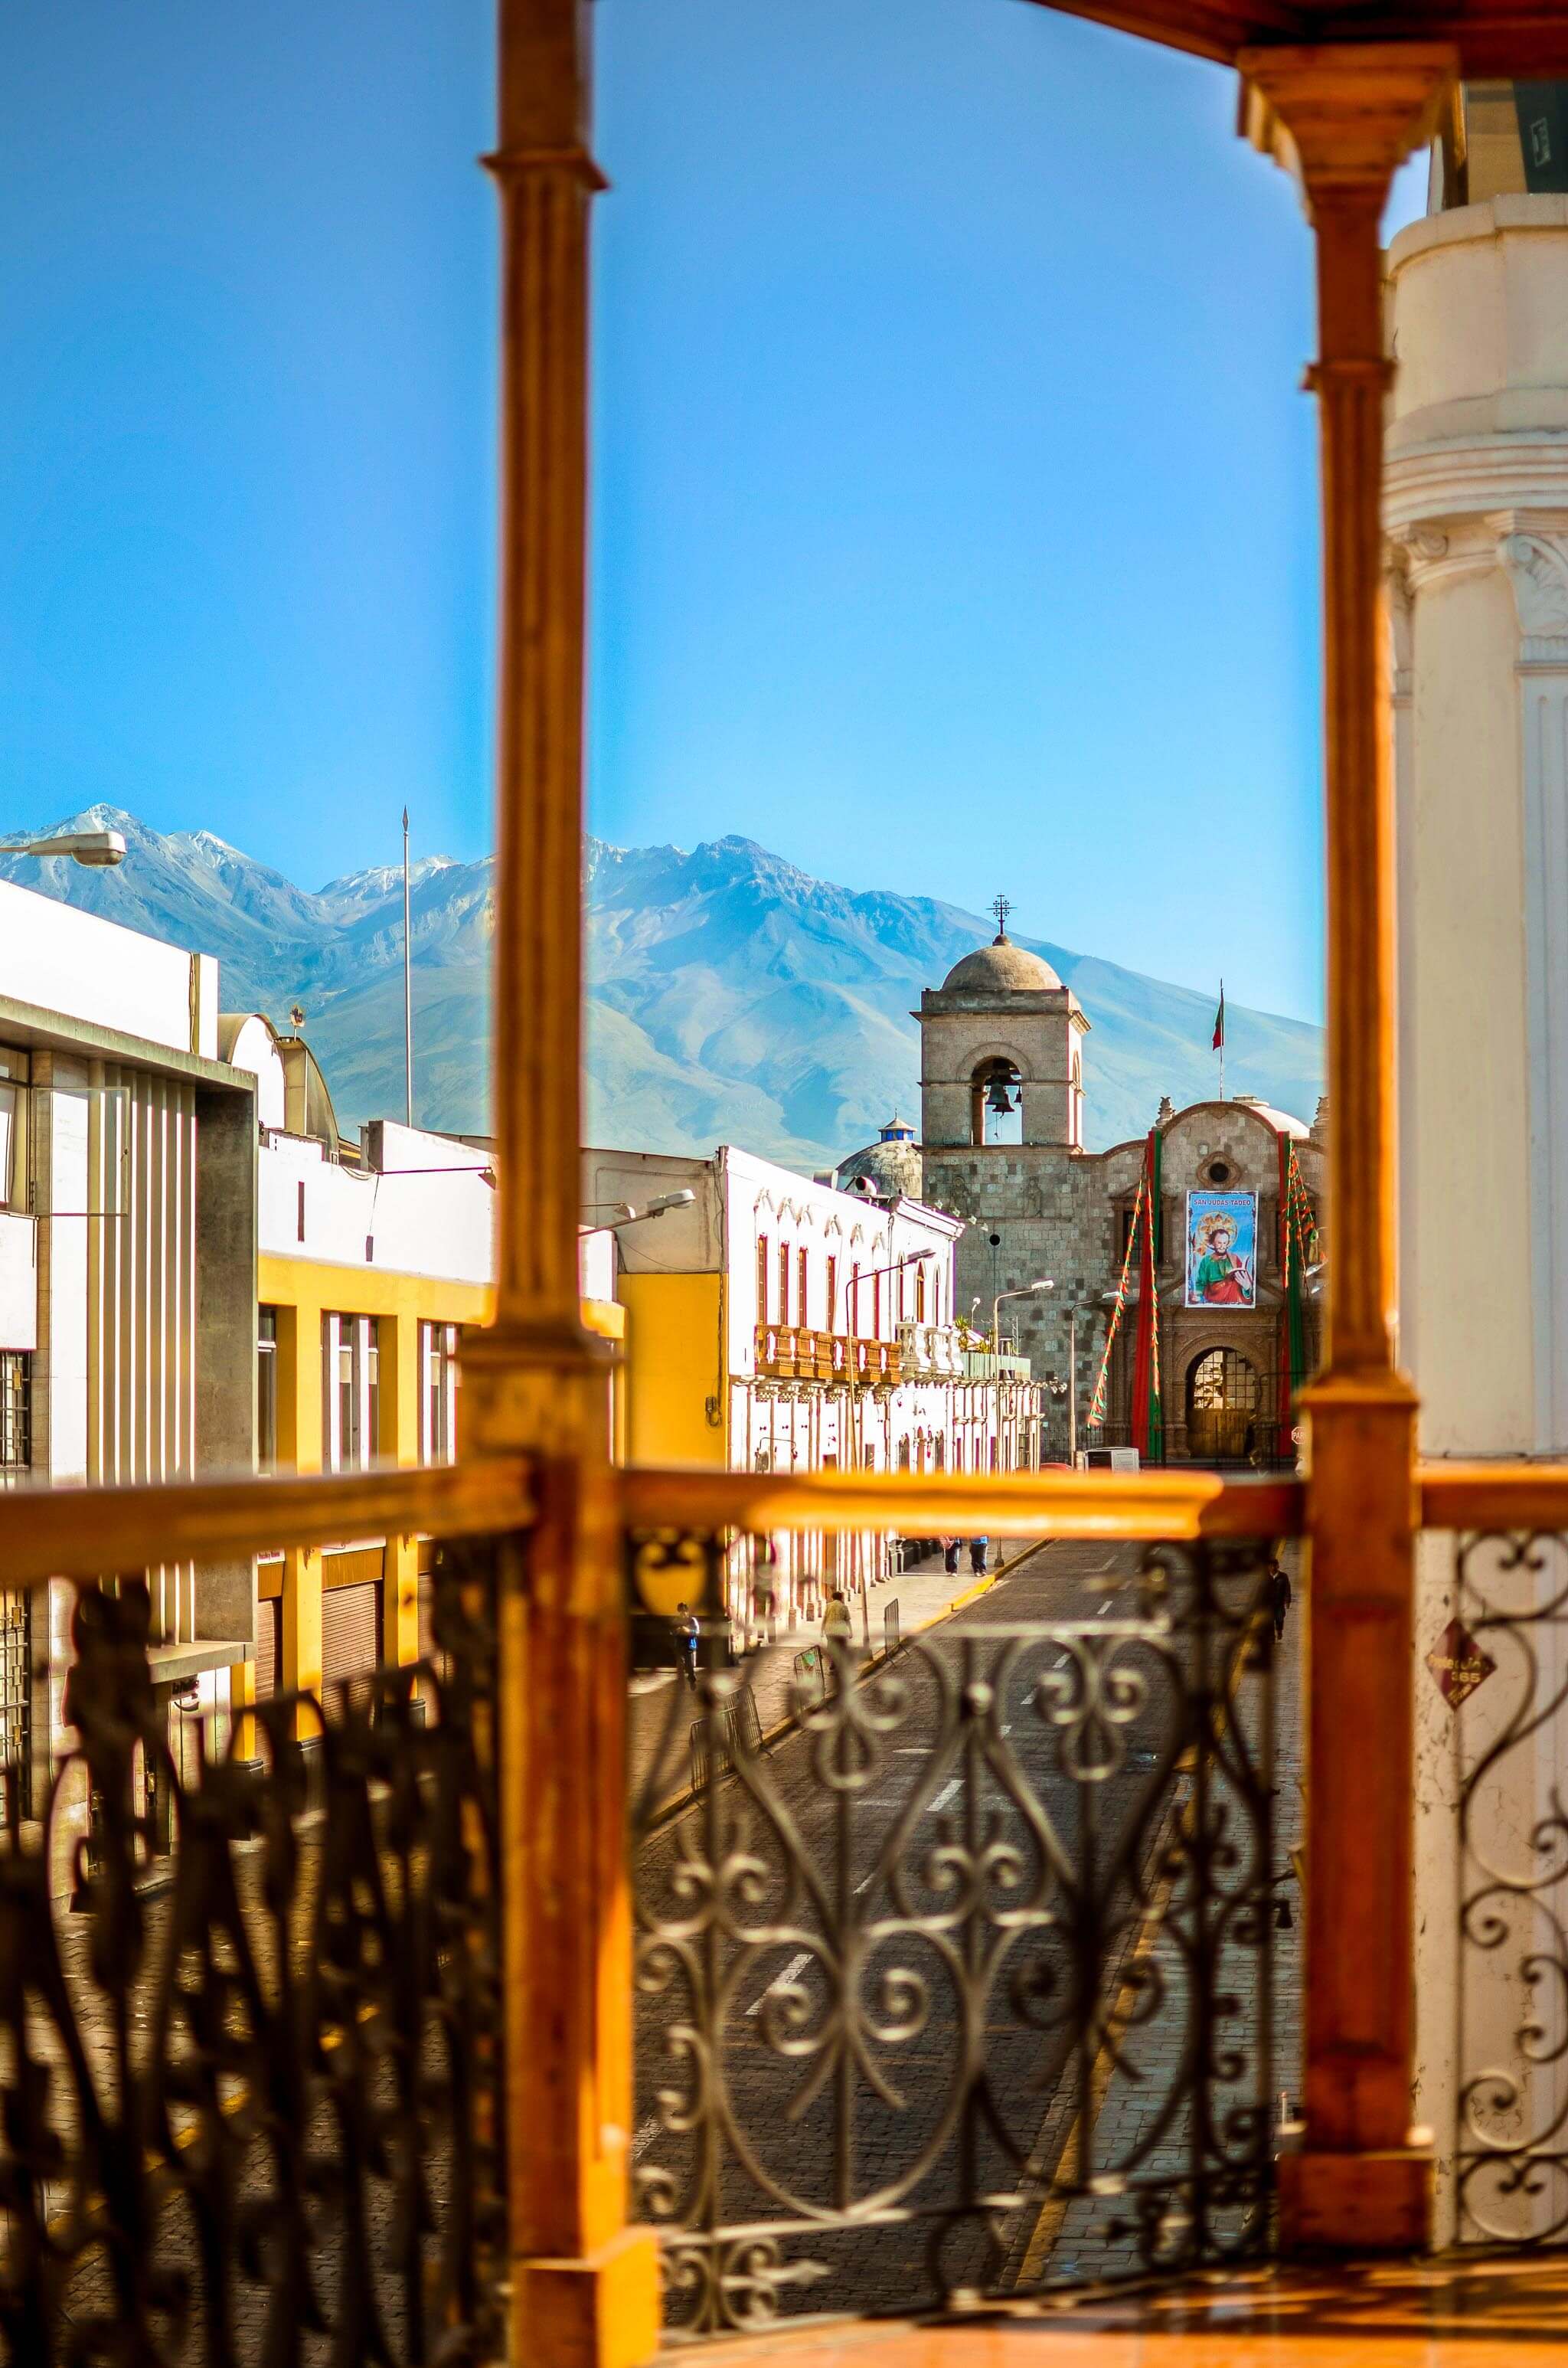 Views from the Balcony at Le Foyer Arequipa